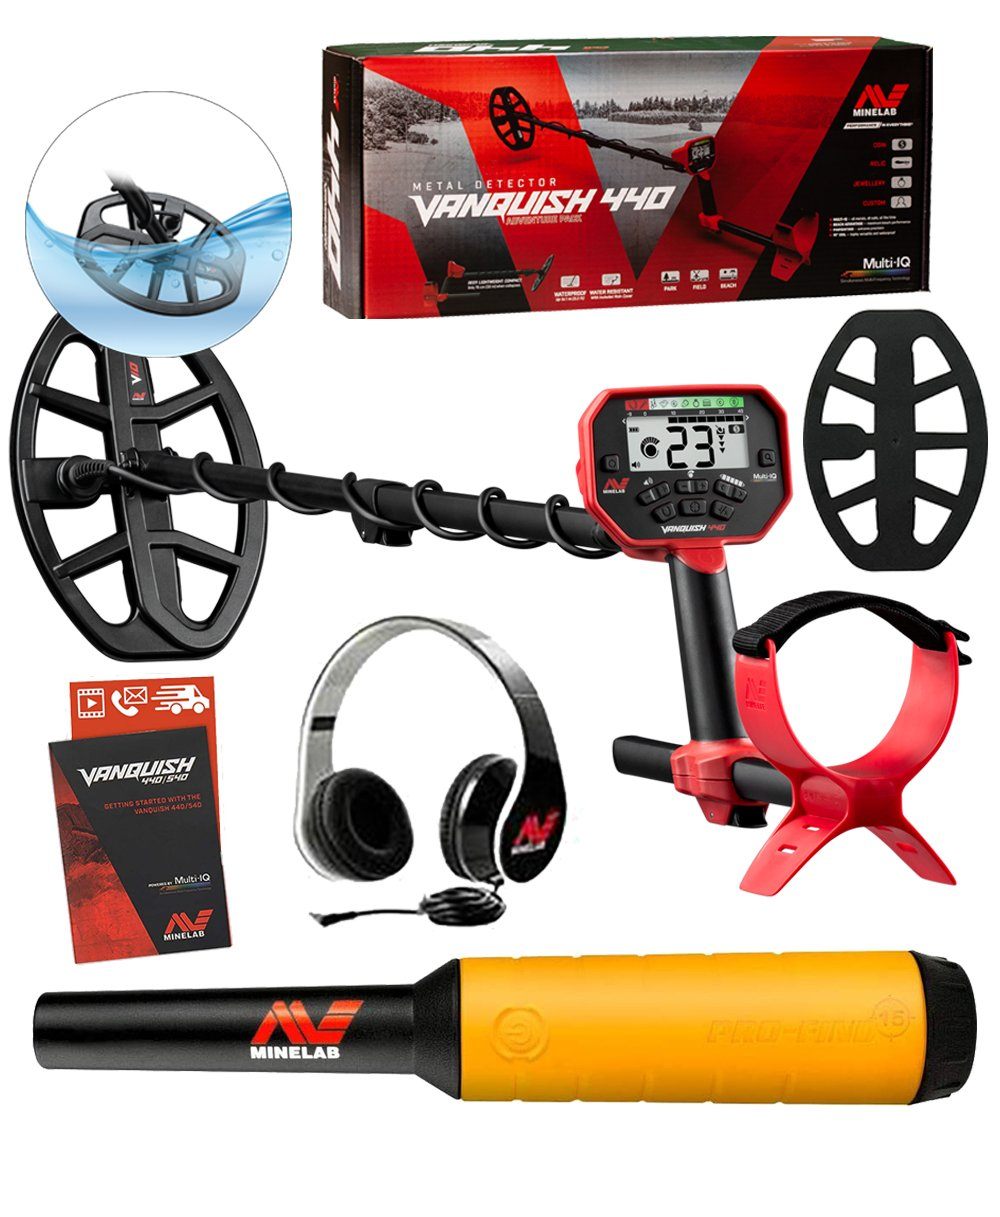 Minelab Vanquis 440 metal detector, Pro-Find pinpointer, headphones, coil cover, and quick start guides.,